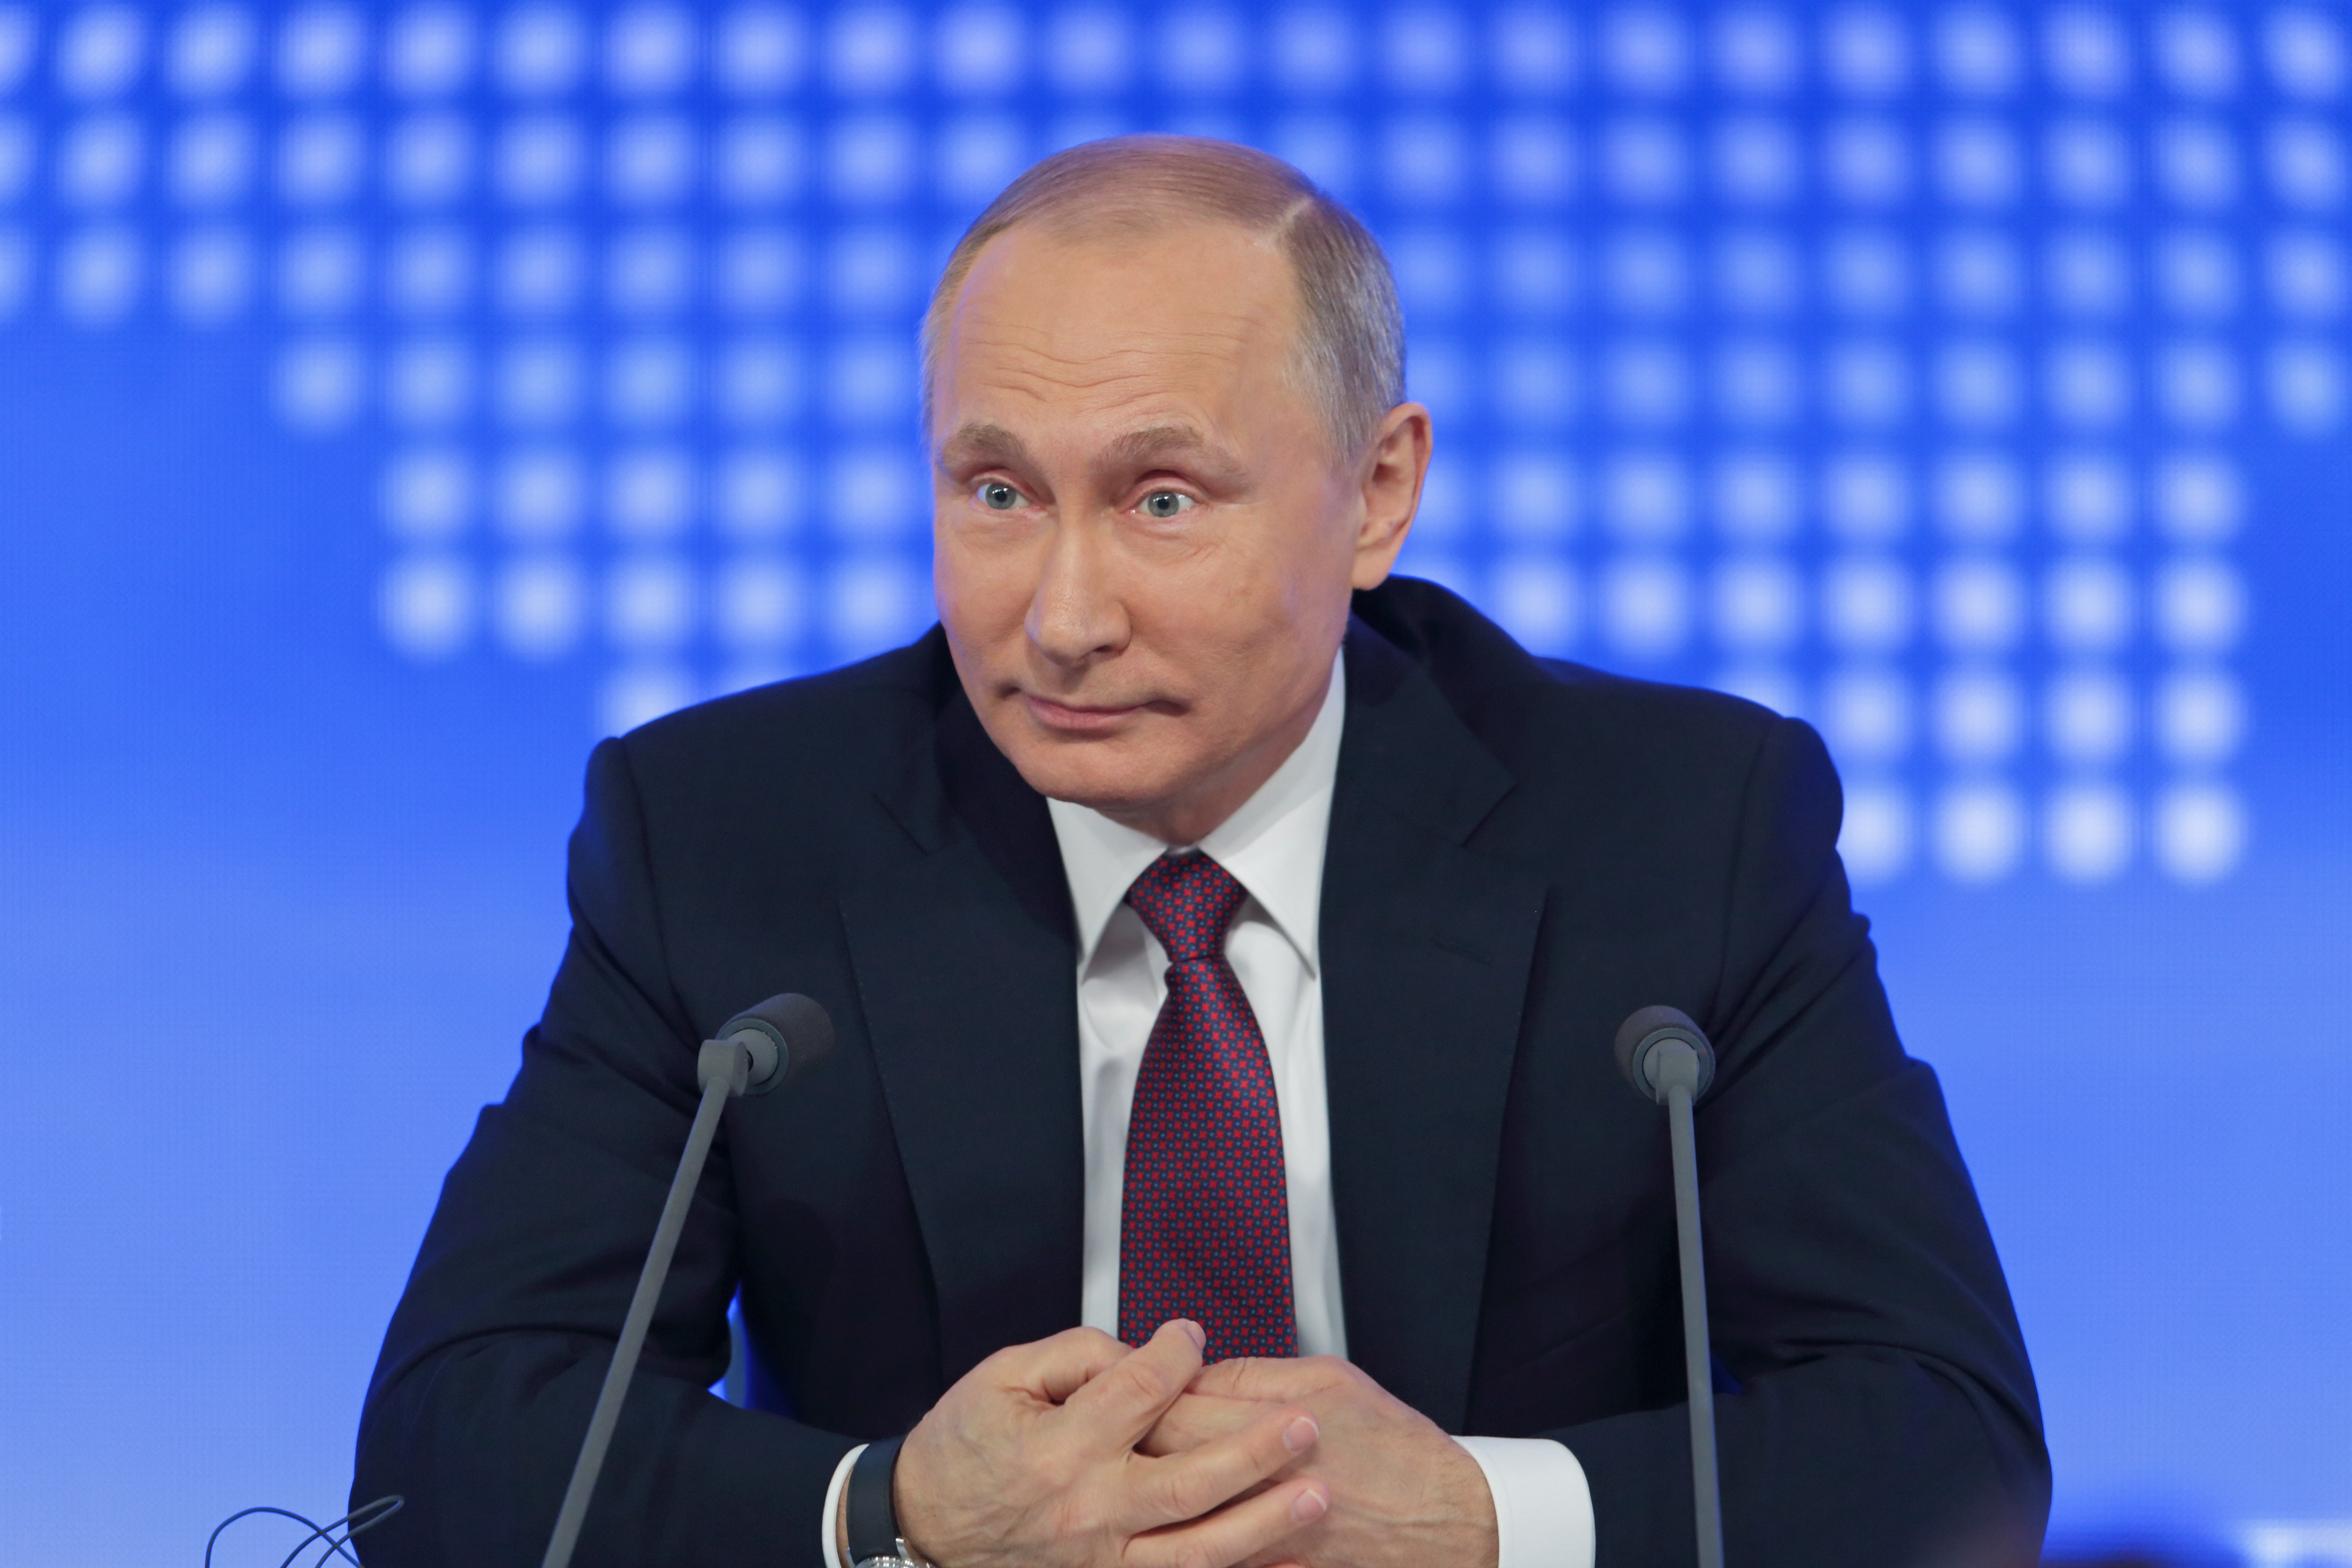 Vladimir Putin Gives Ominous Warning 4 Months Into Ukraine Invasion: 'Haven't Started Anything Yet In Earnest'